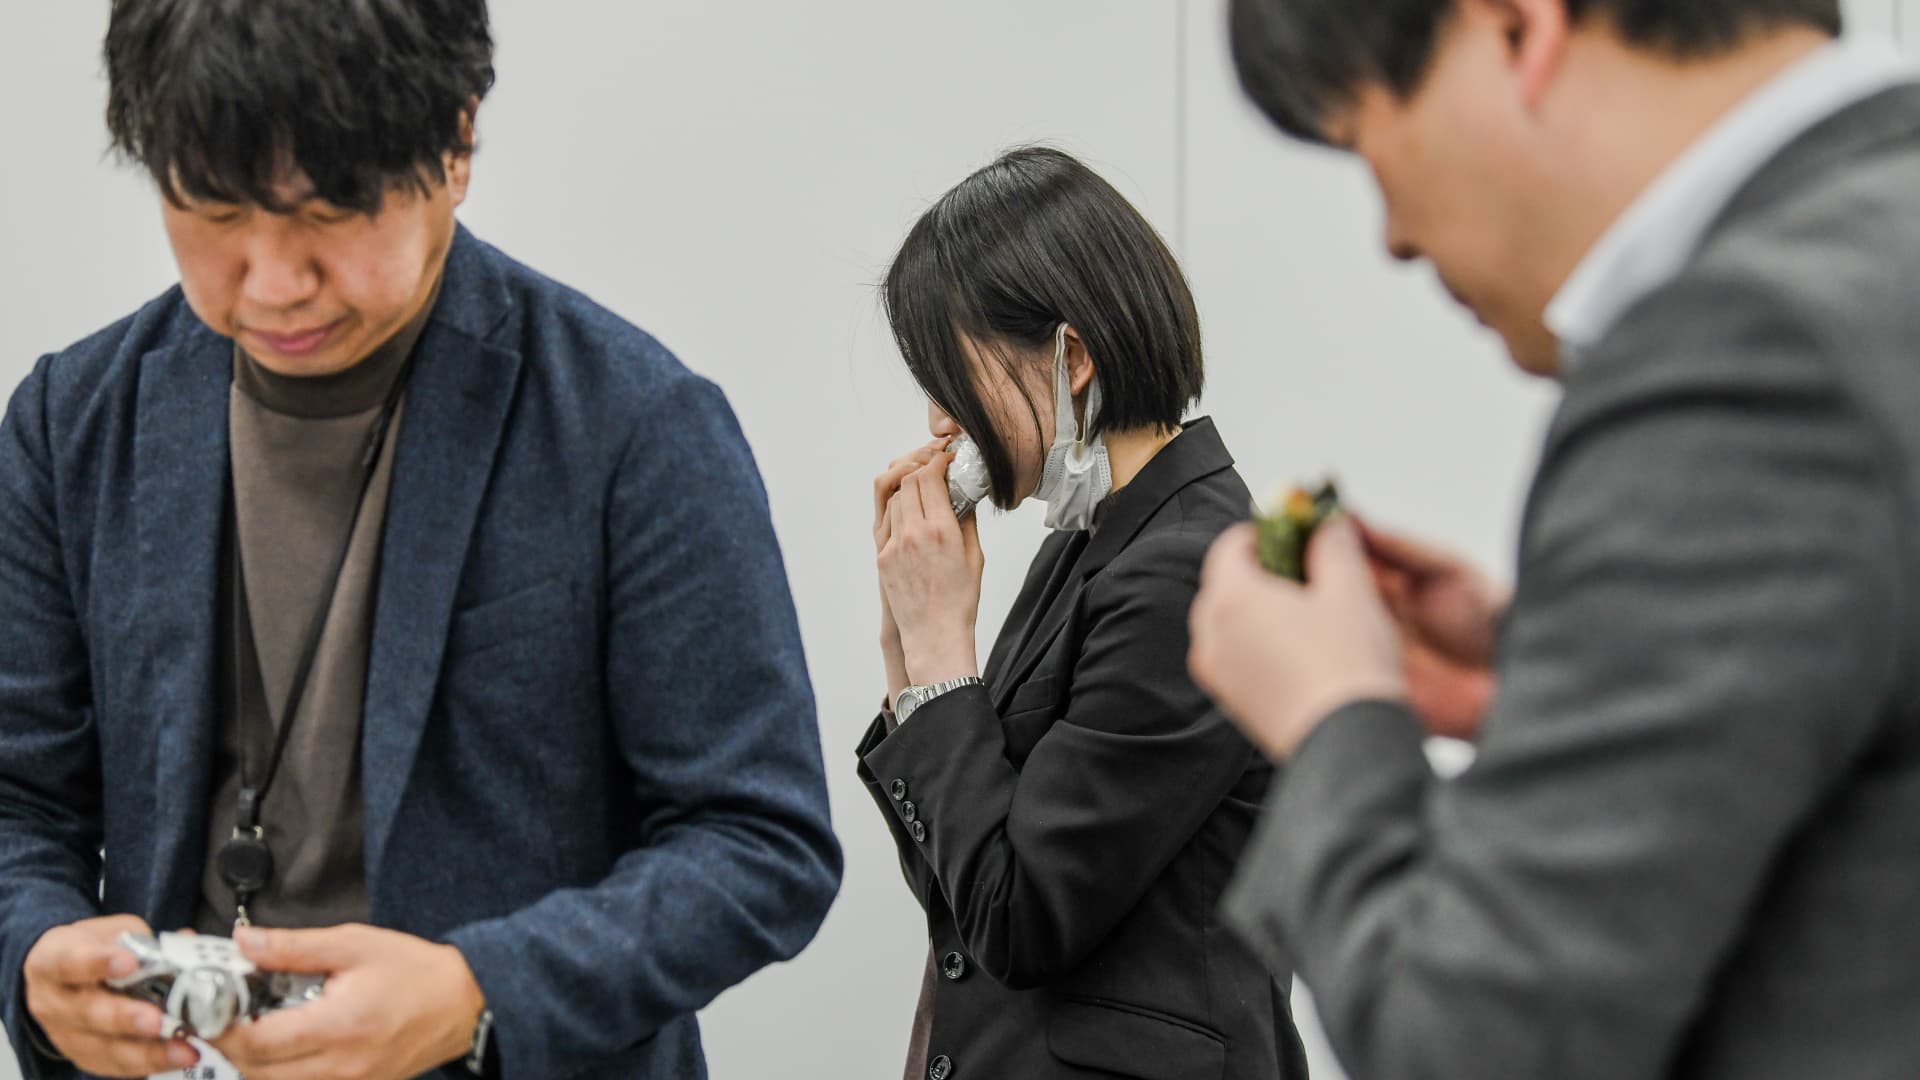 Participants taste onigiri at a product meeting for 7-Eleven Japan in Tokyo on Jan. 23, 2024. Staff and suppliers gathered to discuss flavors, textures and fillings for the Japanese riceballs, one of 7-Eleven's most important products, with more than 2 billion sold each year.